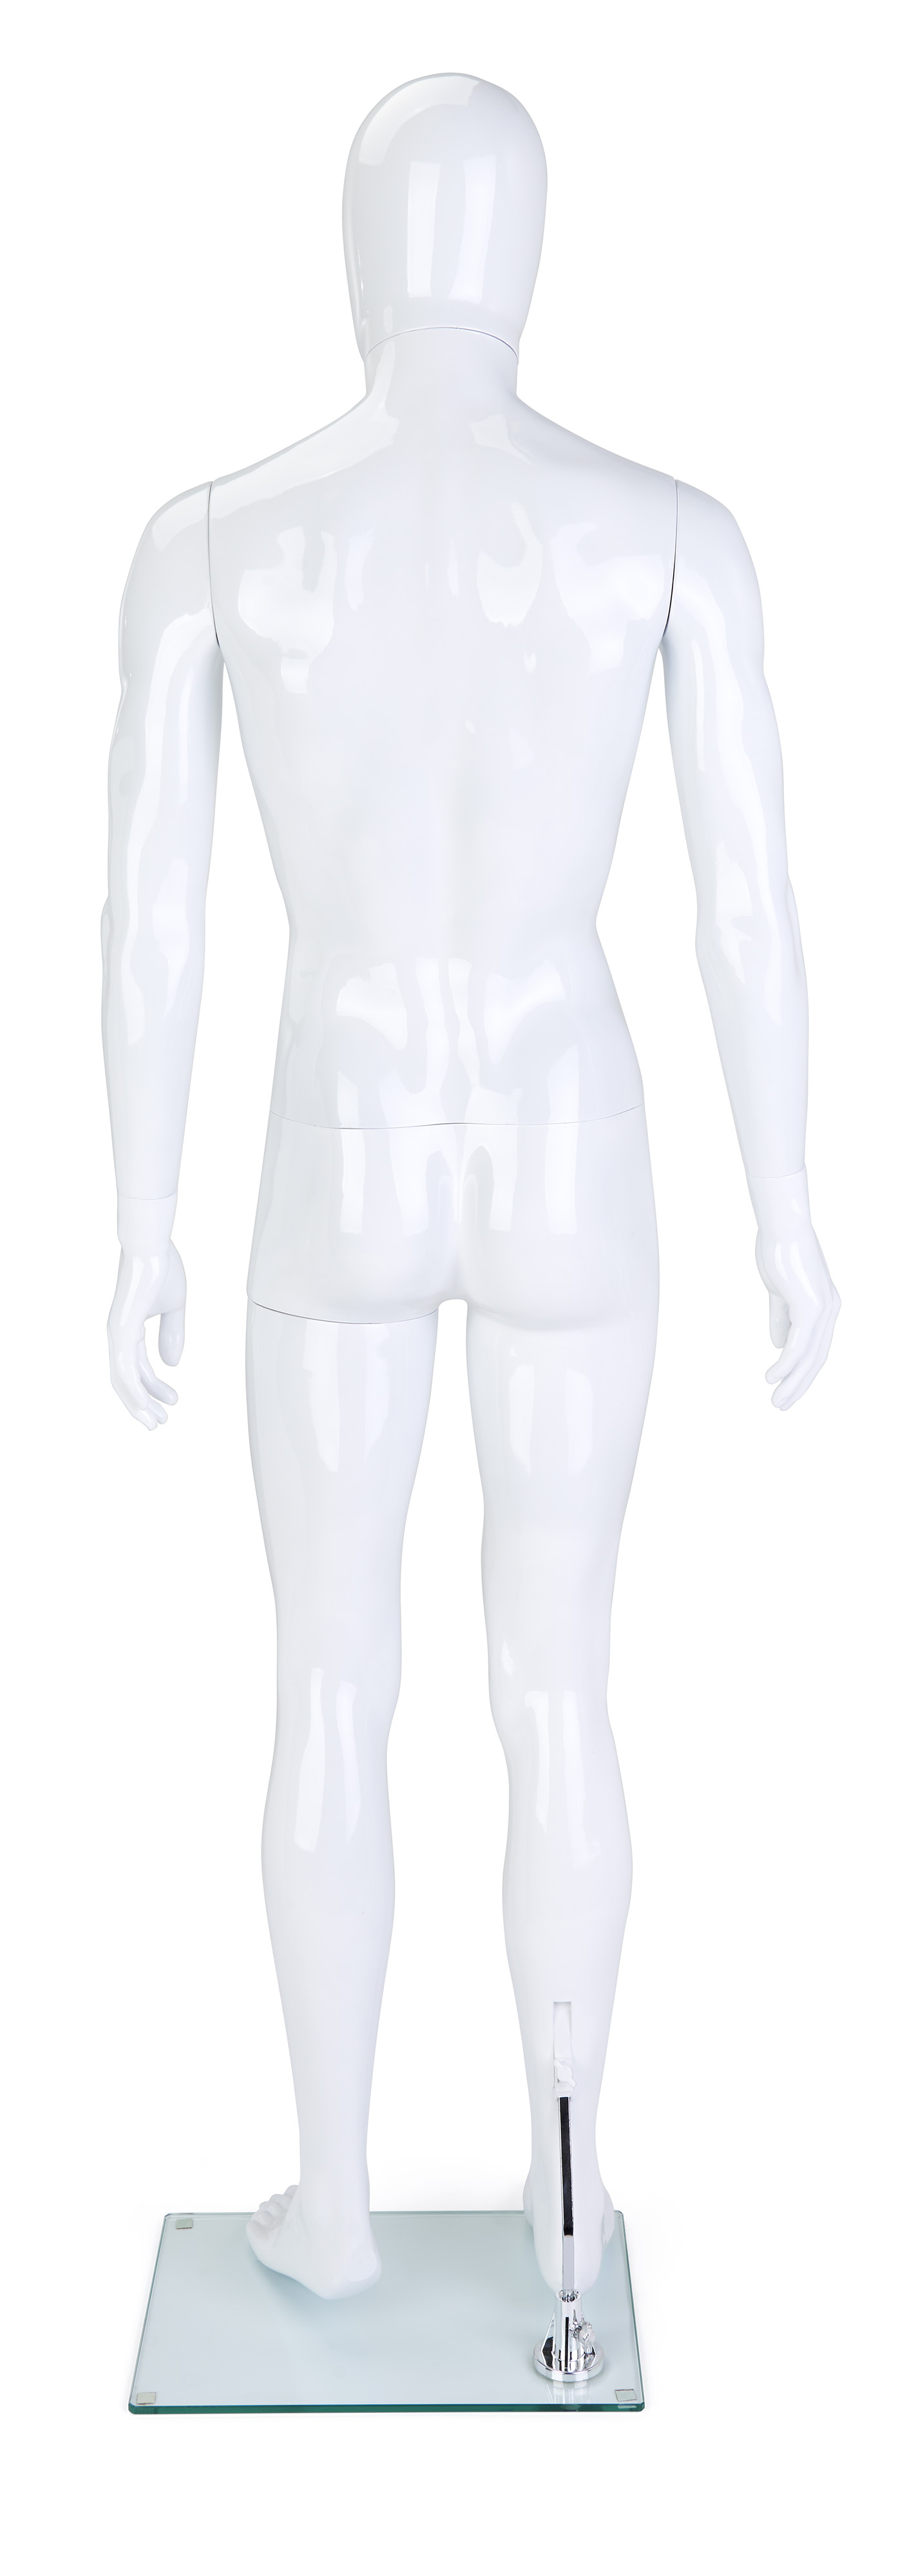 Full Body Glossy Male Mannequin Pose 1